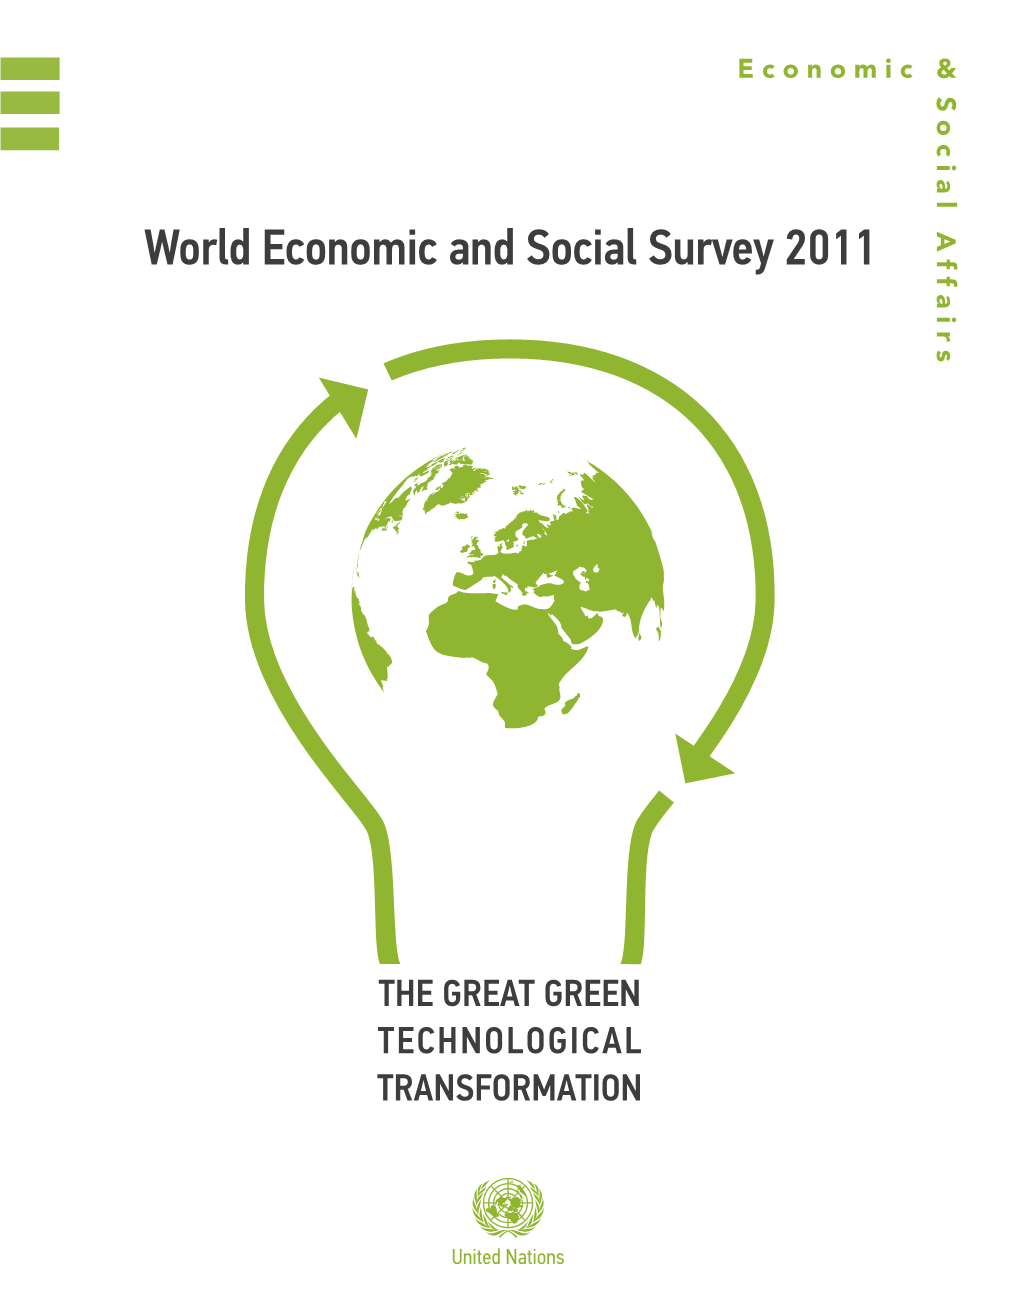 World Economic and Social Survey 2011: the Great Green Technological Transformation